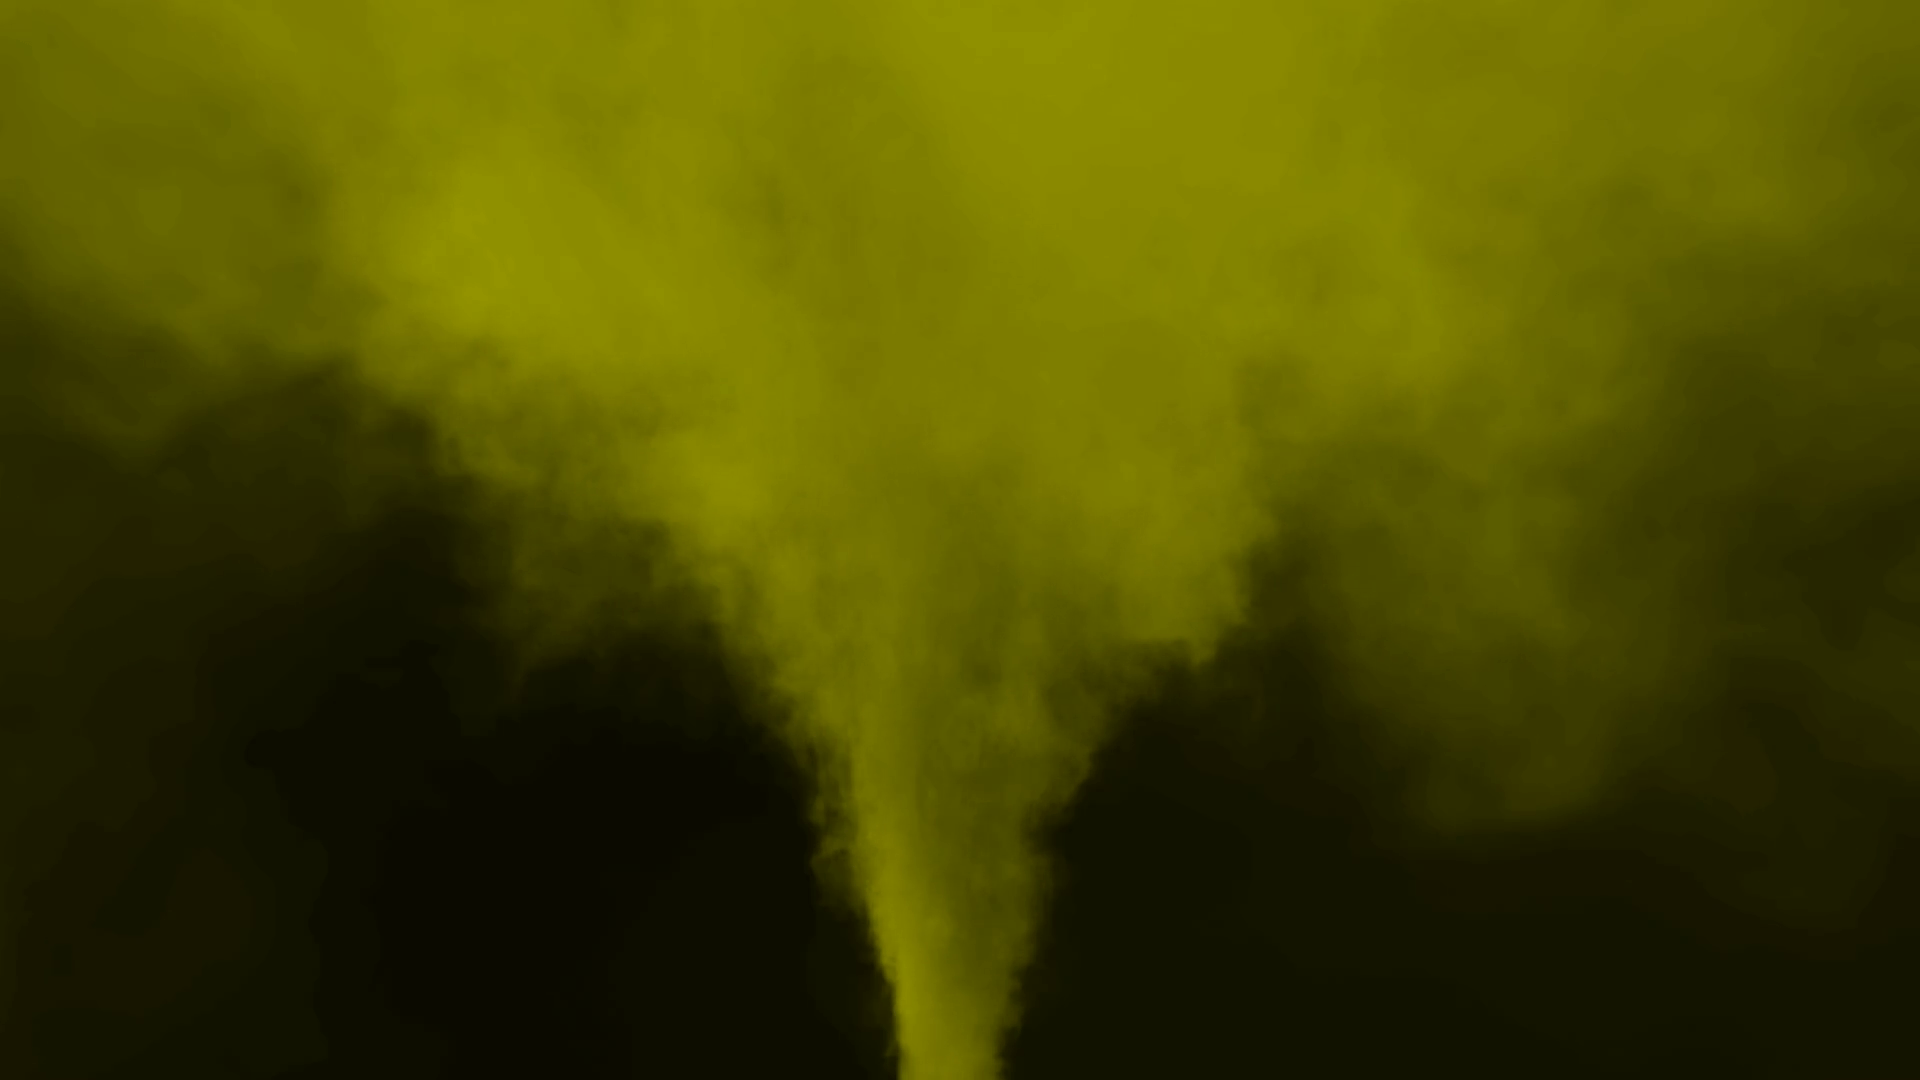 Animated stream of yellow smoke or toxic gas drifting to the right